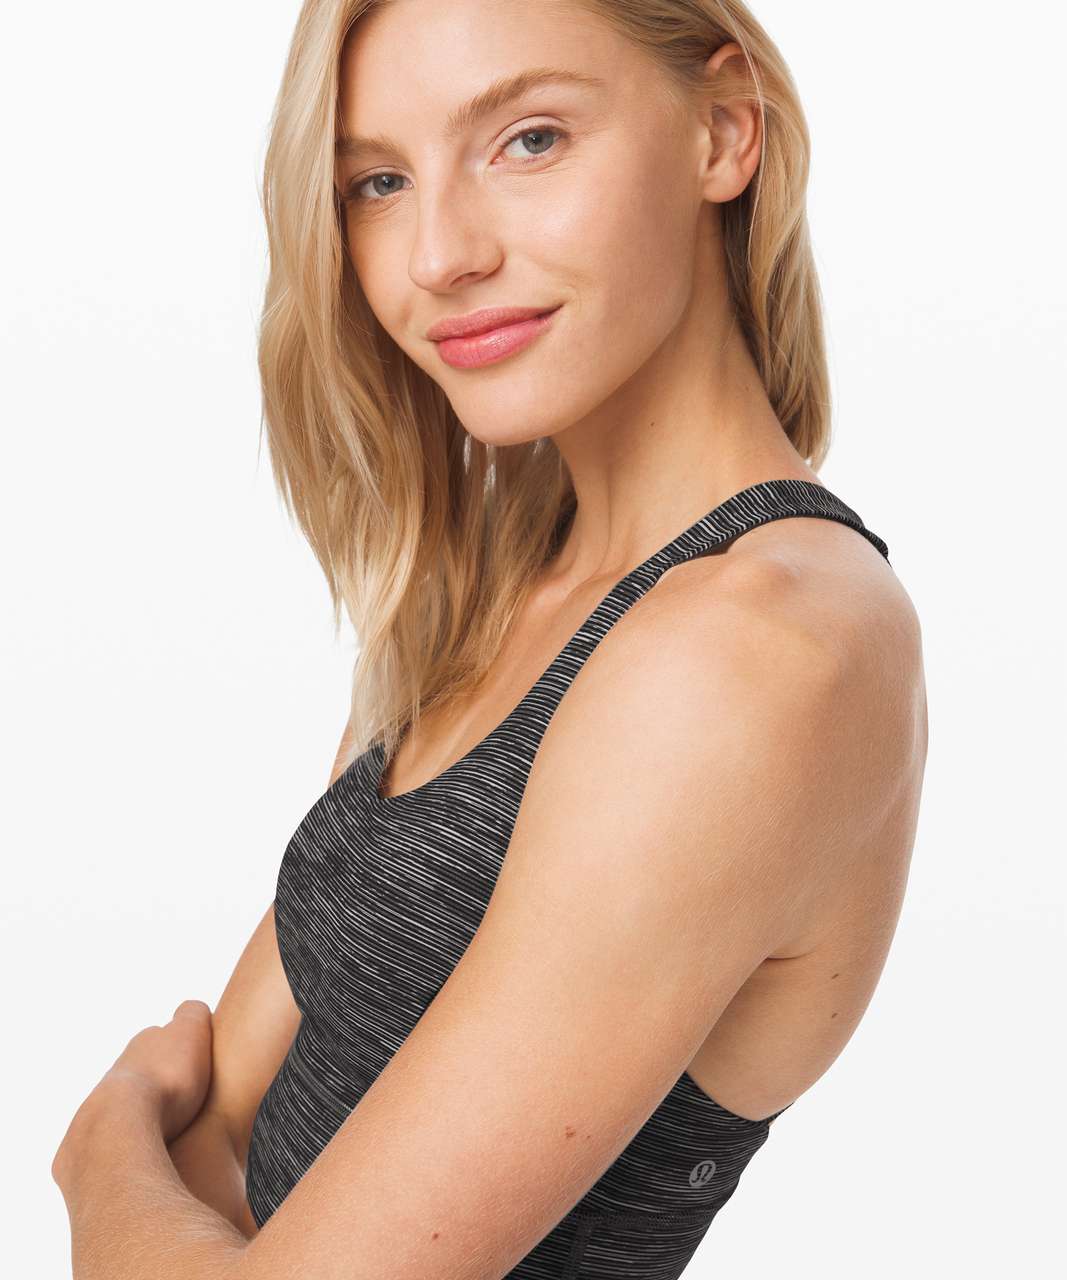 Lululemon Free To Be Serene Bra Long Line *Light Support, C/D Cup (Online Only) - Wee Are From Space Dark Carbon Ice Grey